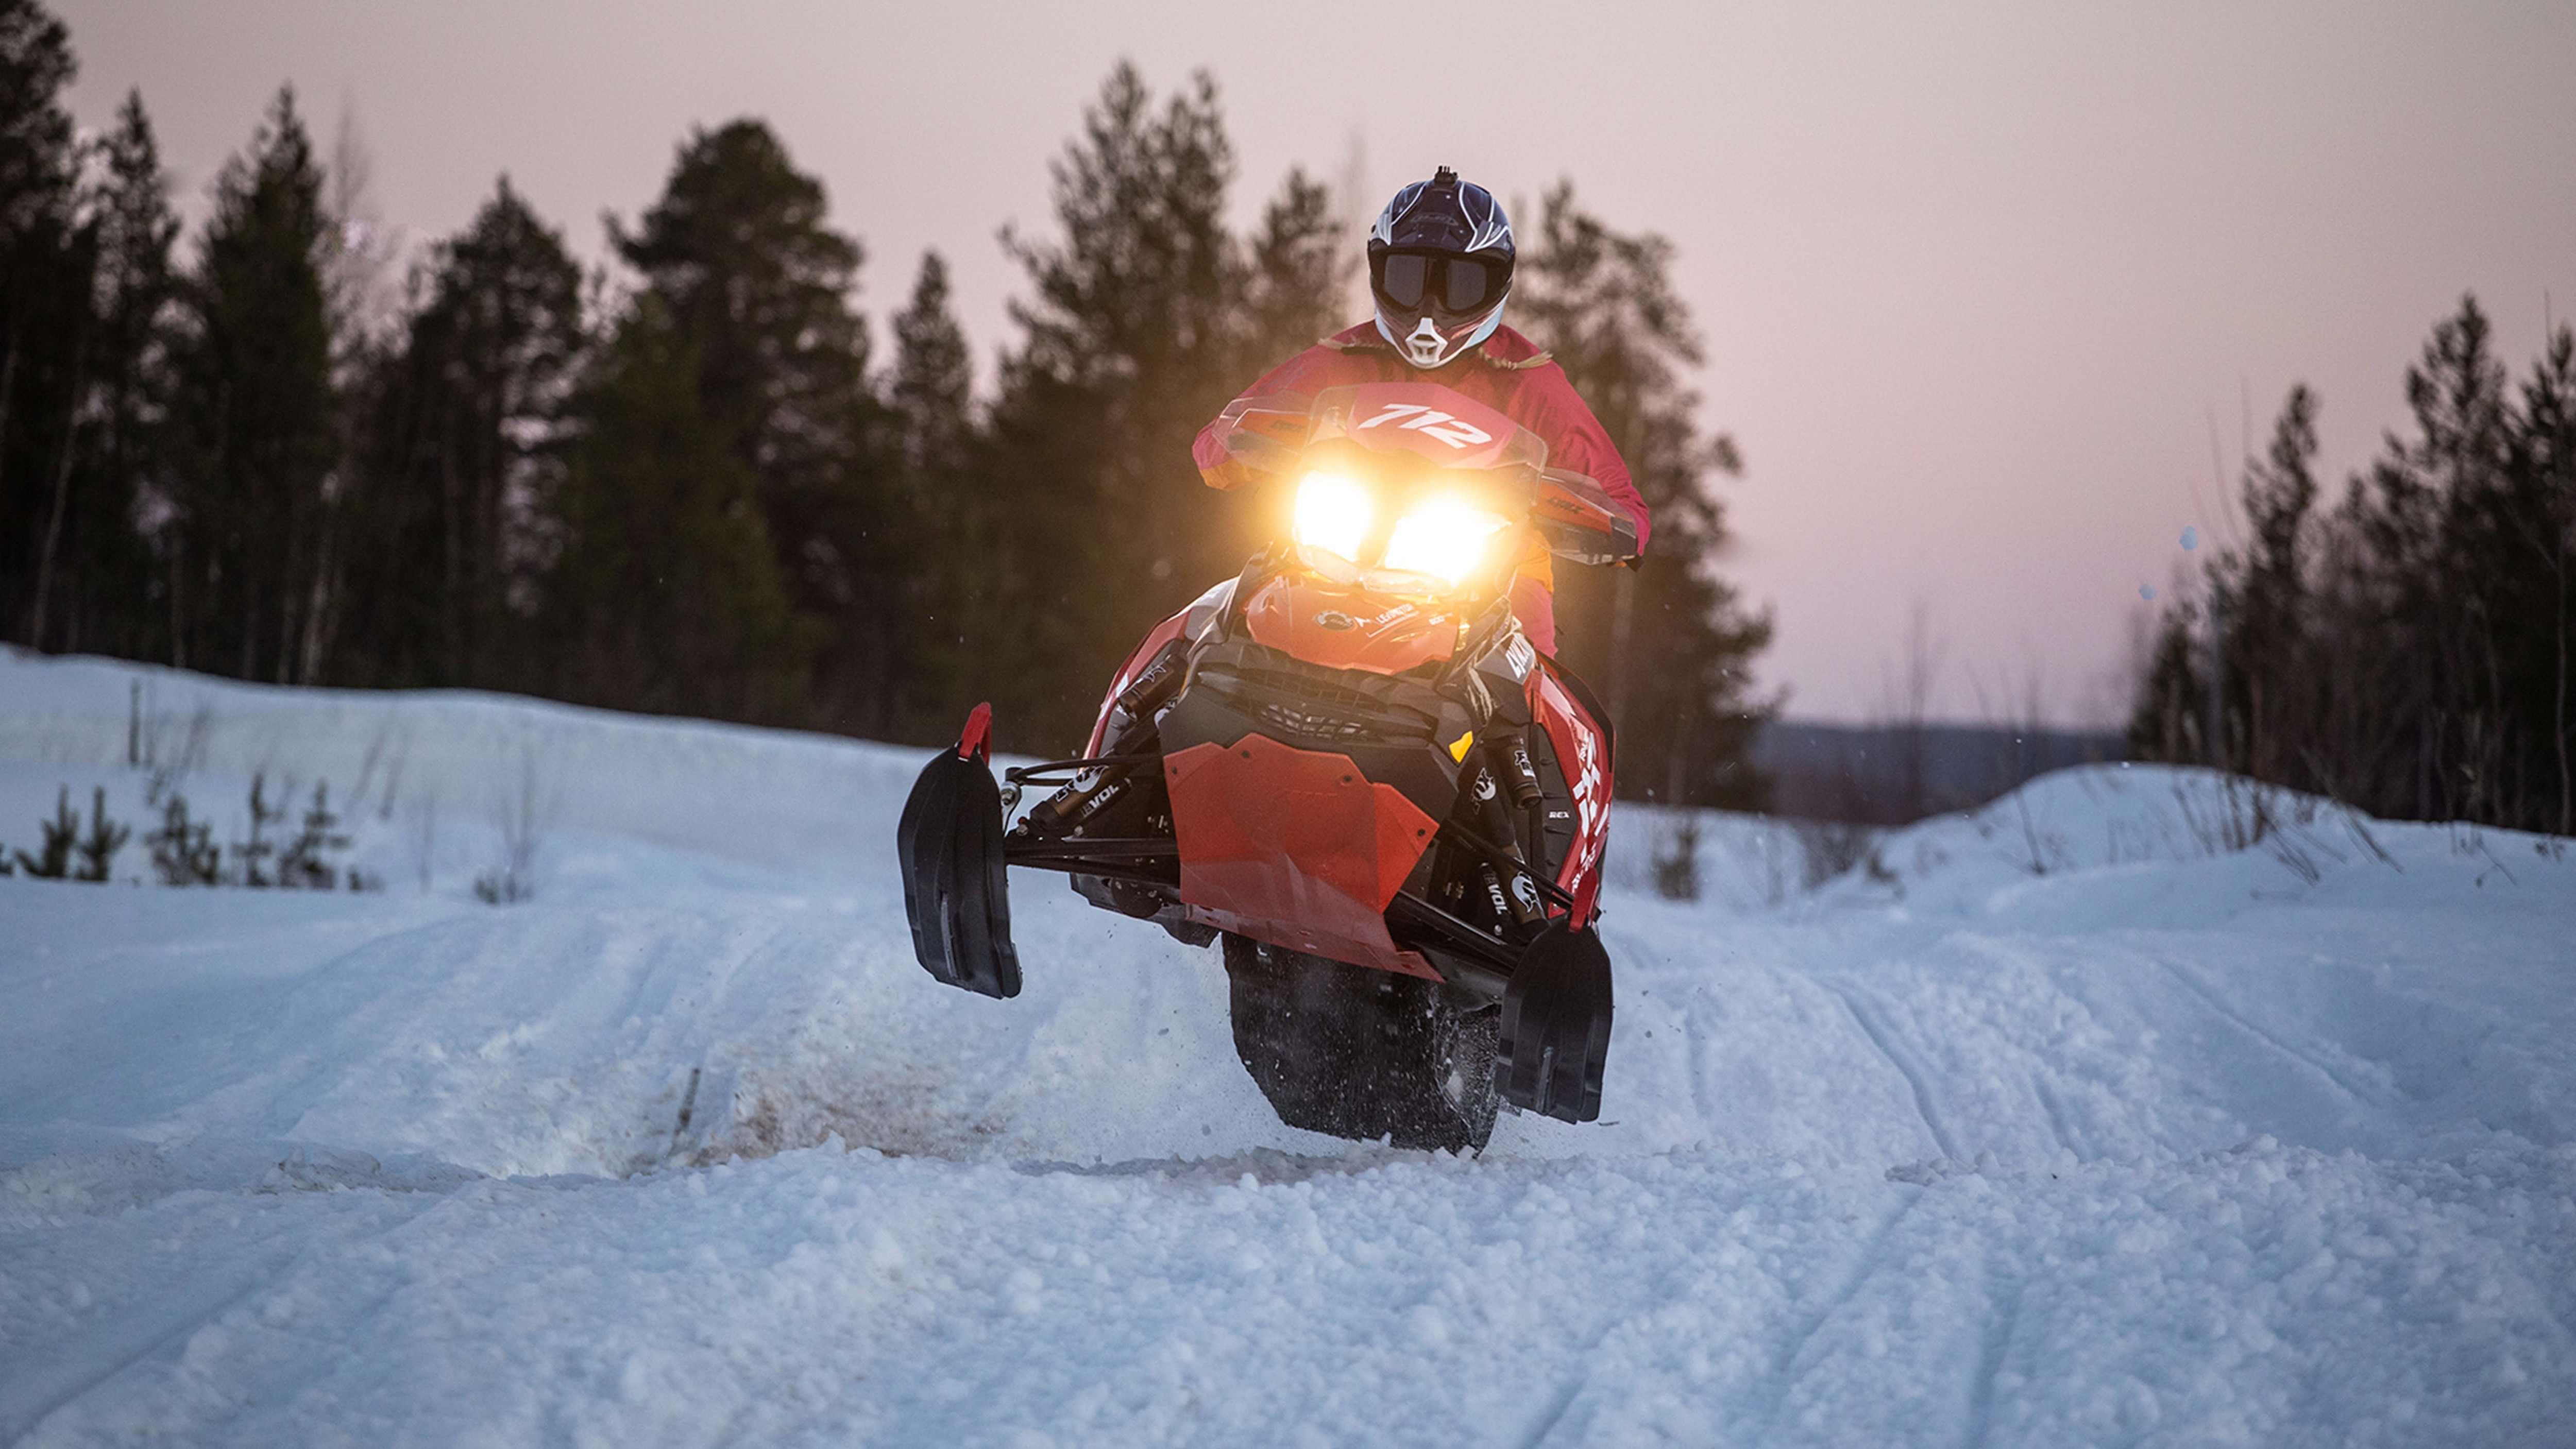 A woman jumps with a snowmobile from a mogul